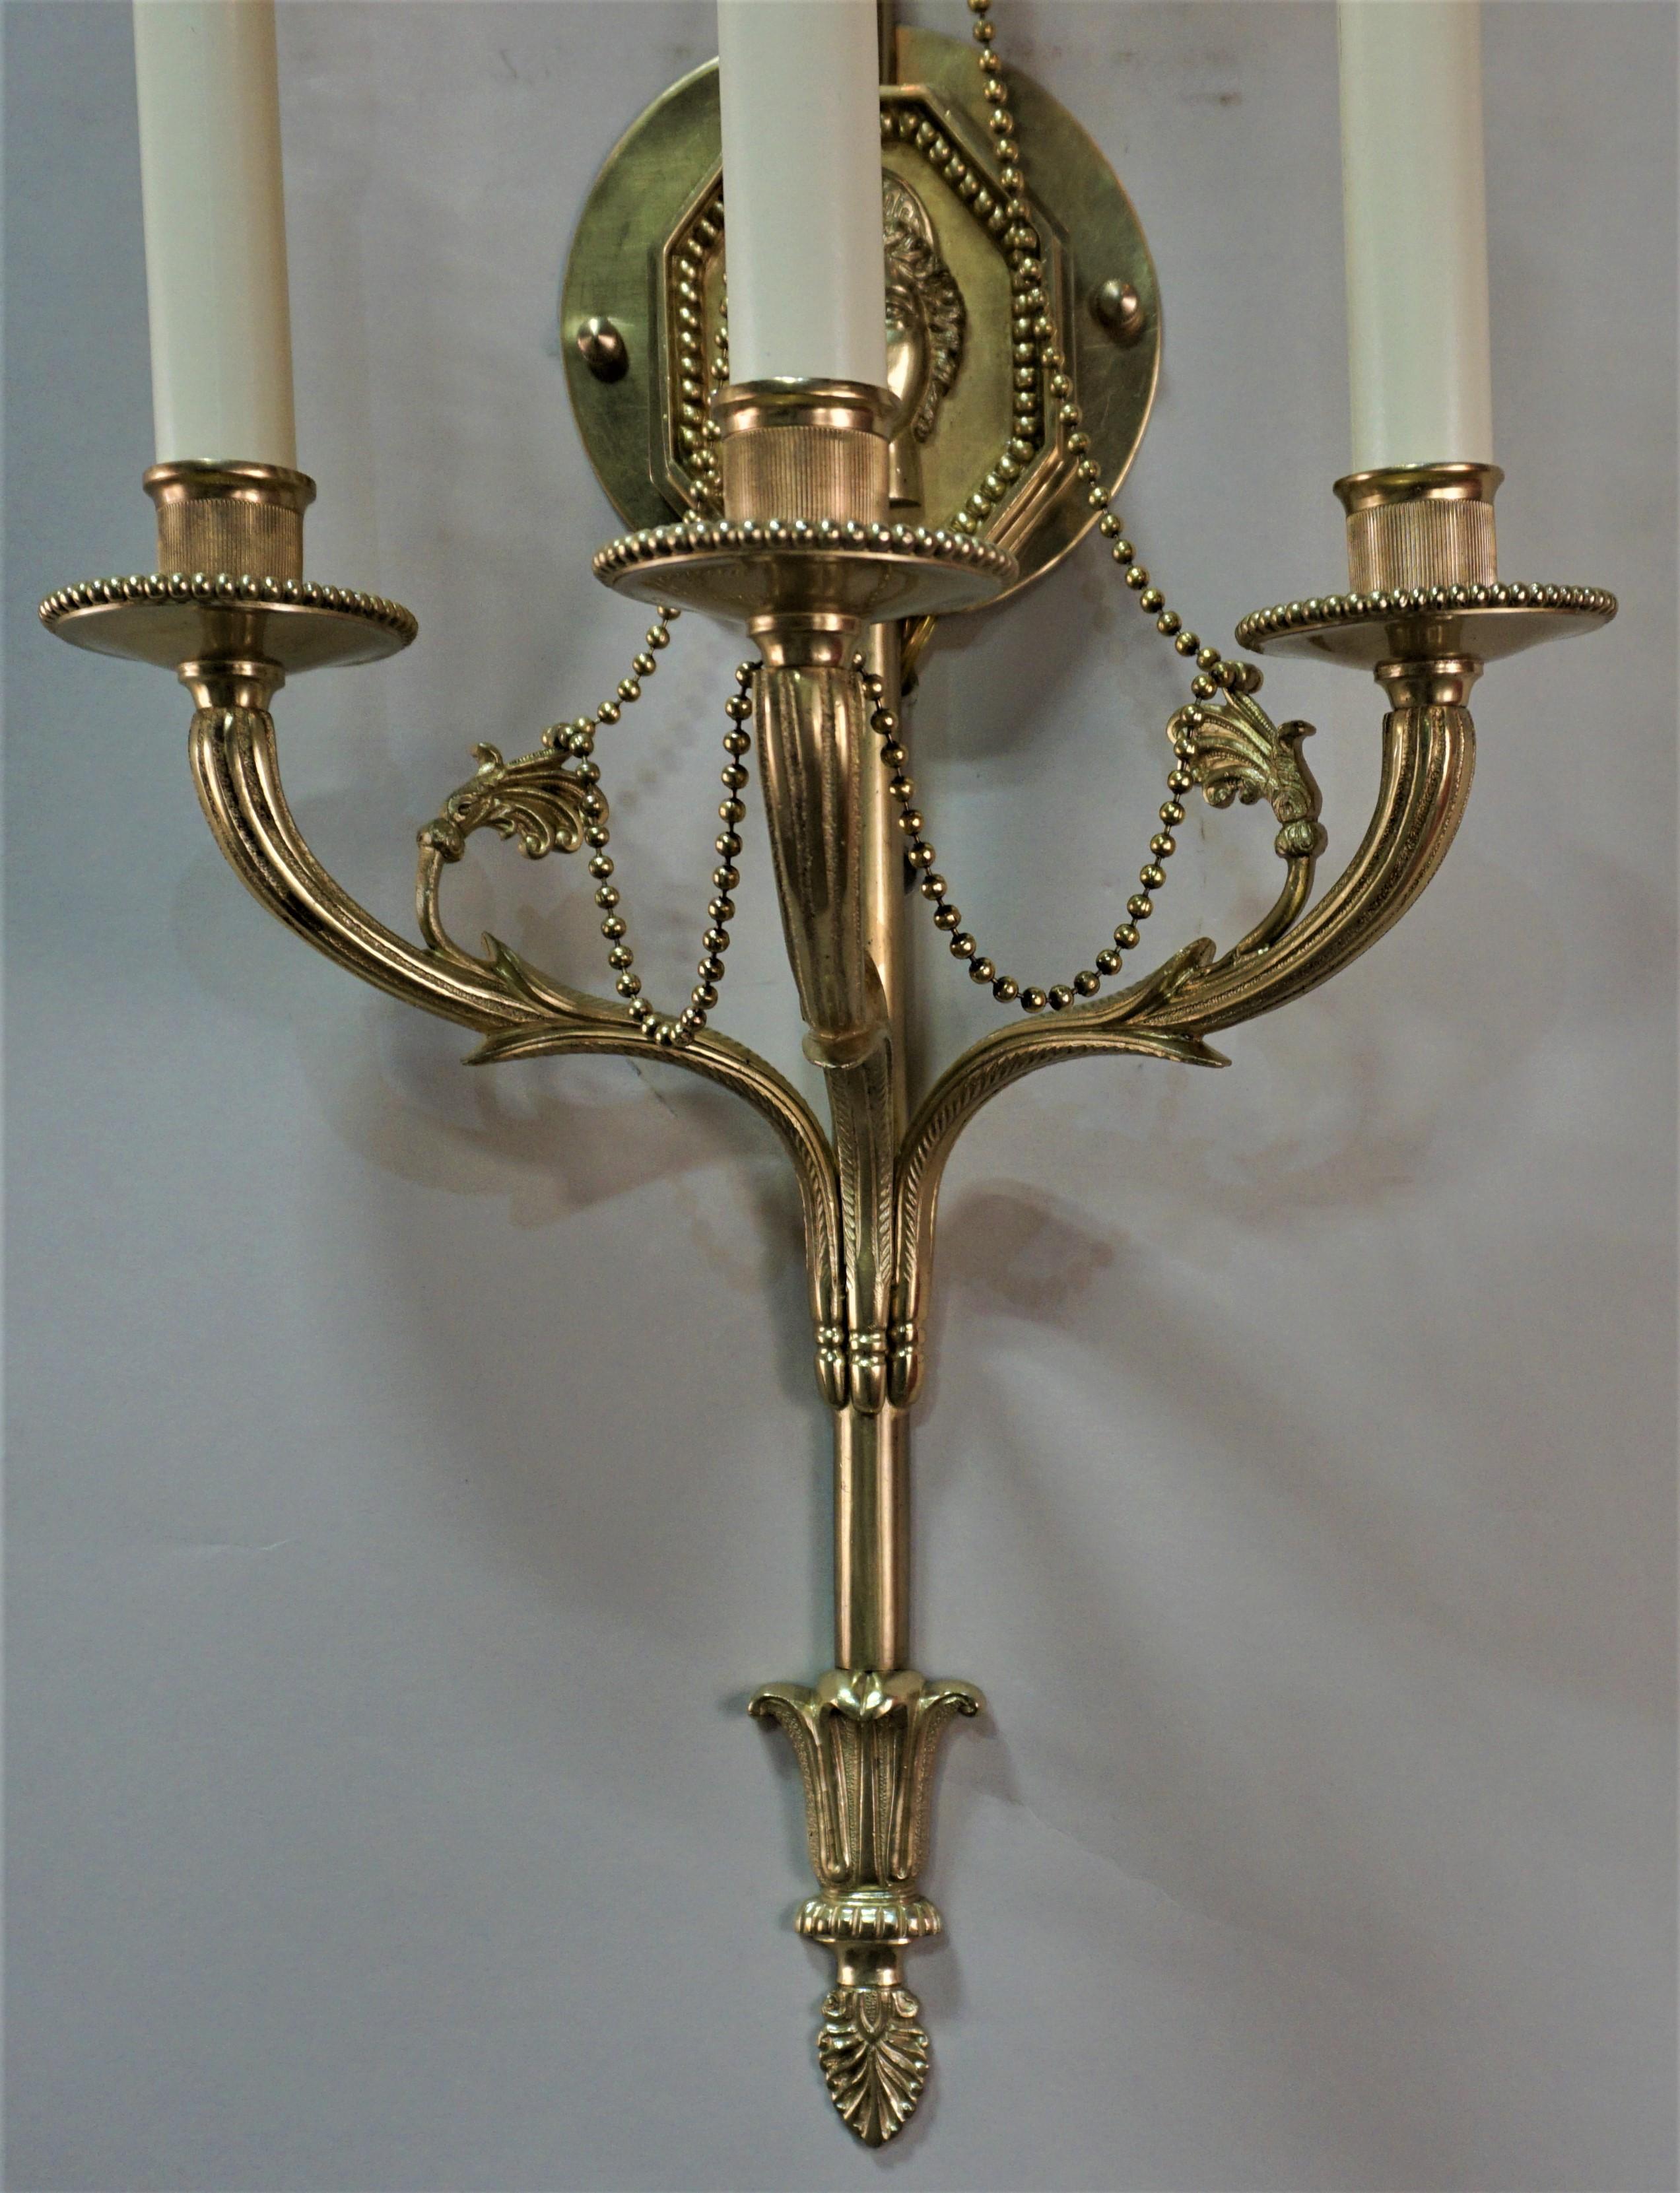 Pair of three-arm bronze wall sconces in classical design.